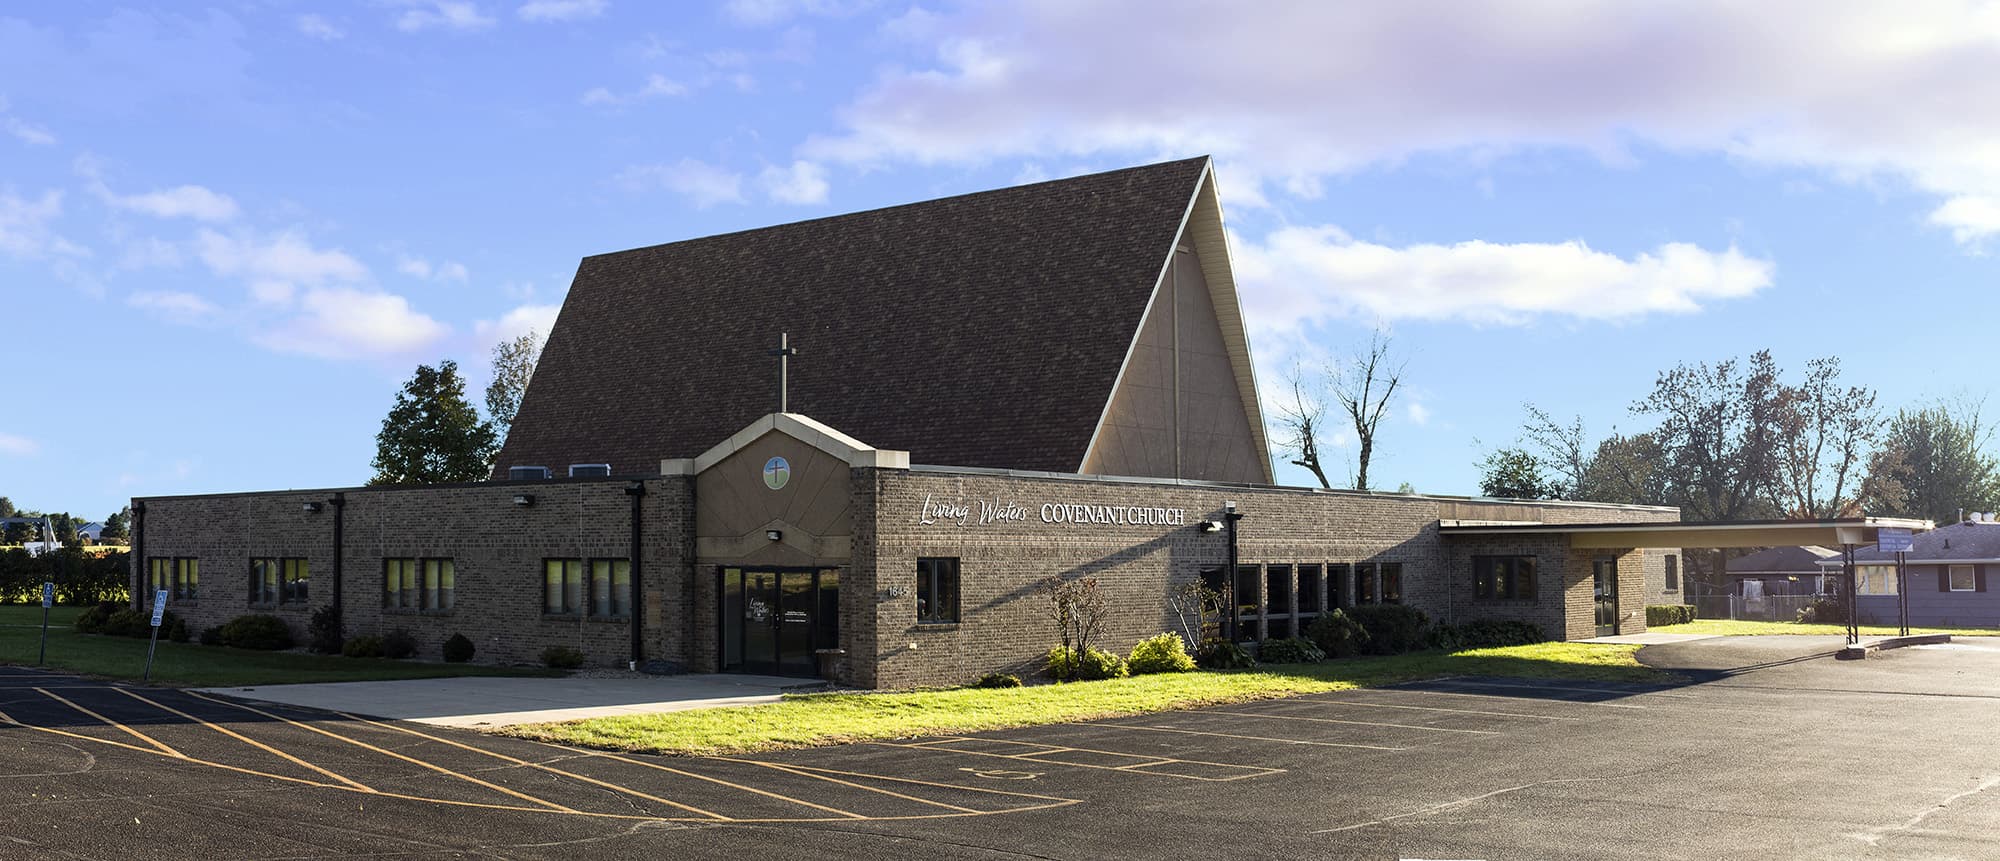 Living Waters Covenant Church exterior